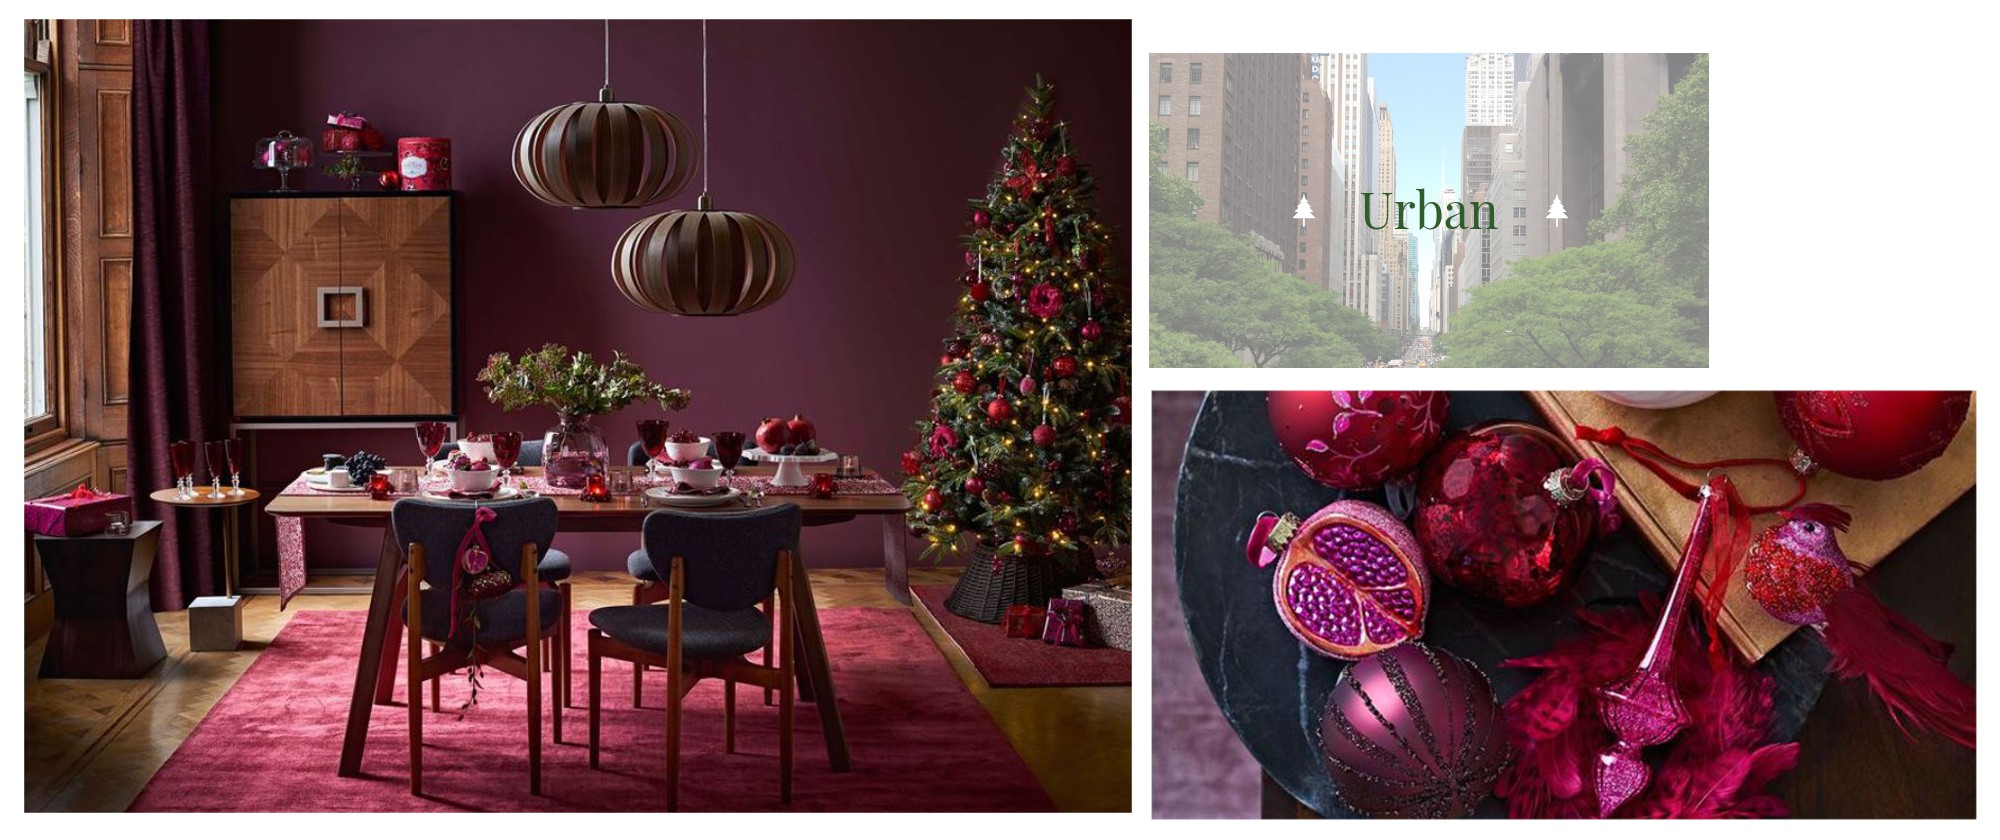 https://talilifestyle.com/2018/12/01/christmas-decoration-trends-2018/